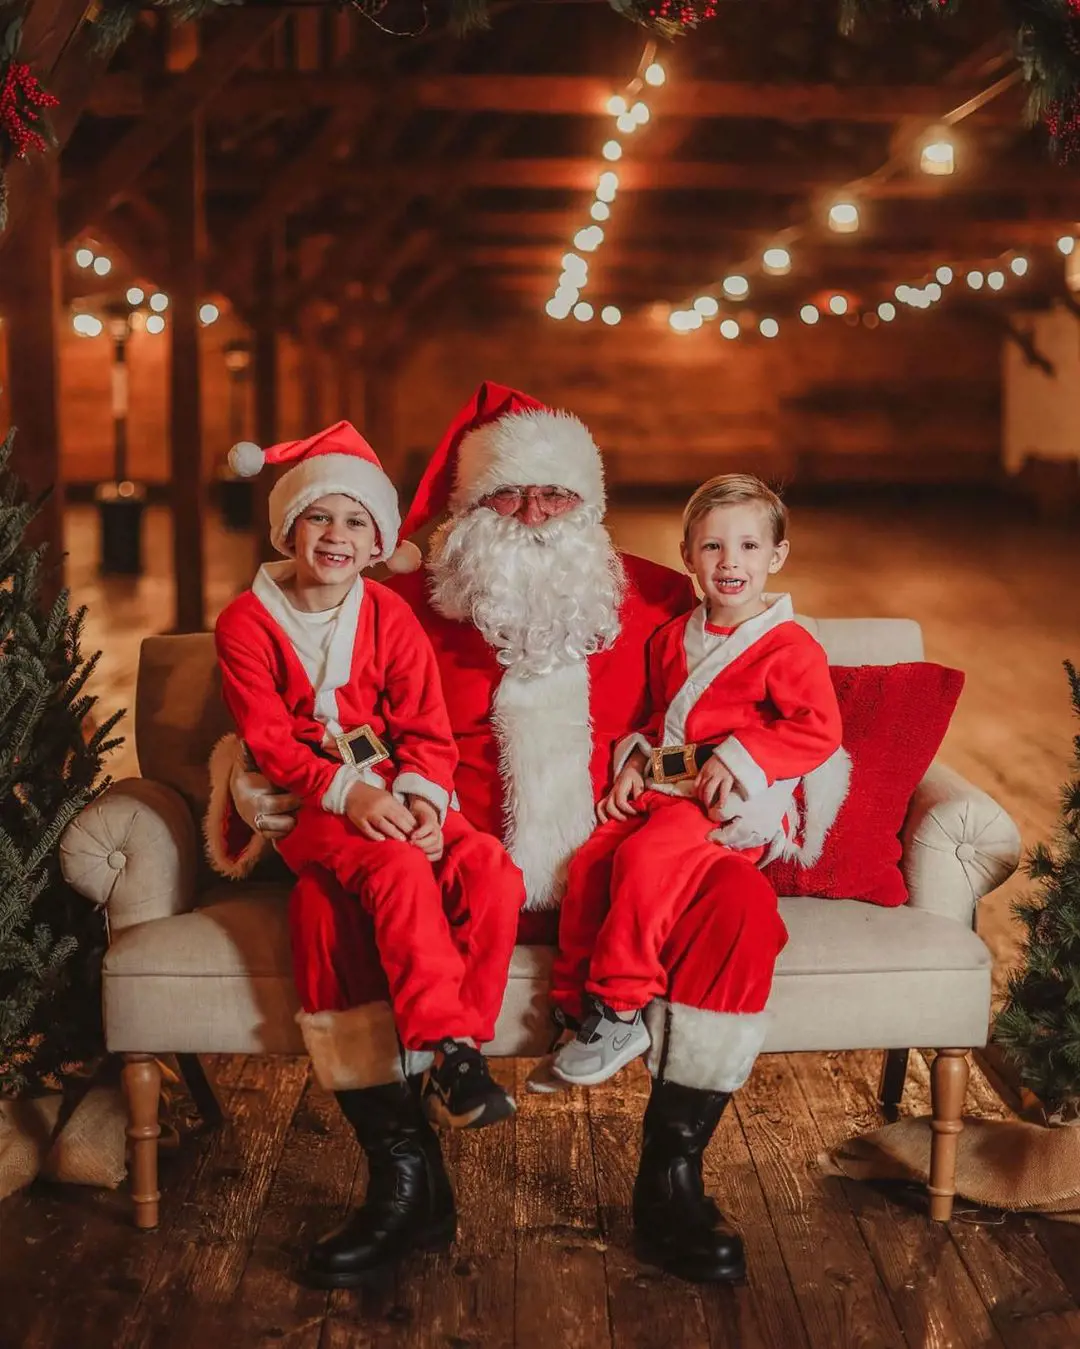 Greyson and August sitting on the lap of Santa Claus on Christmas day in December 2021